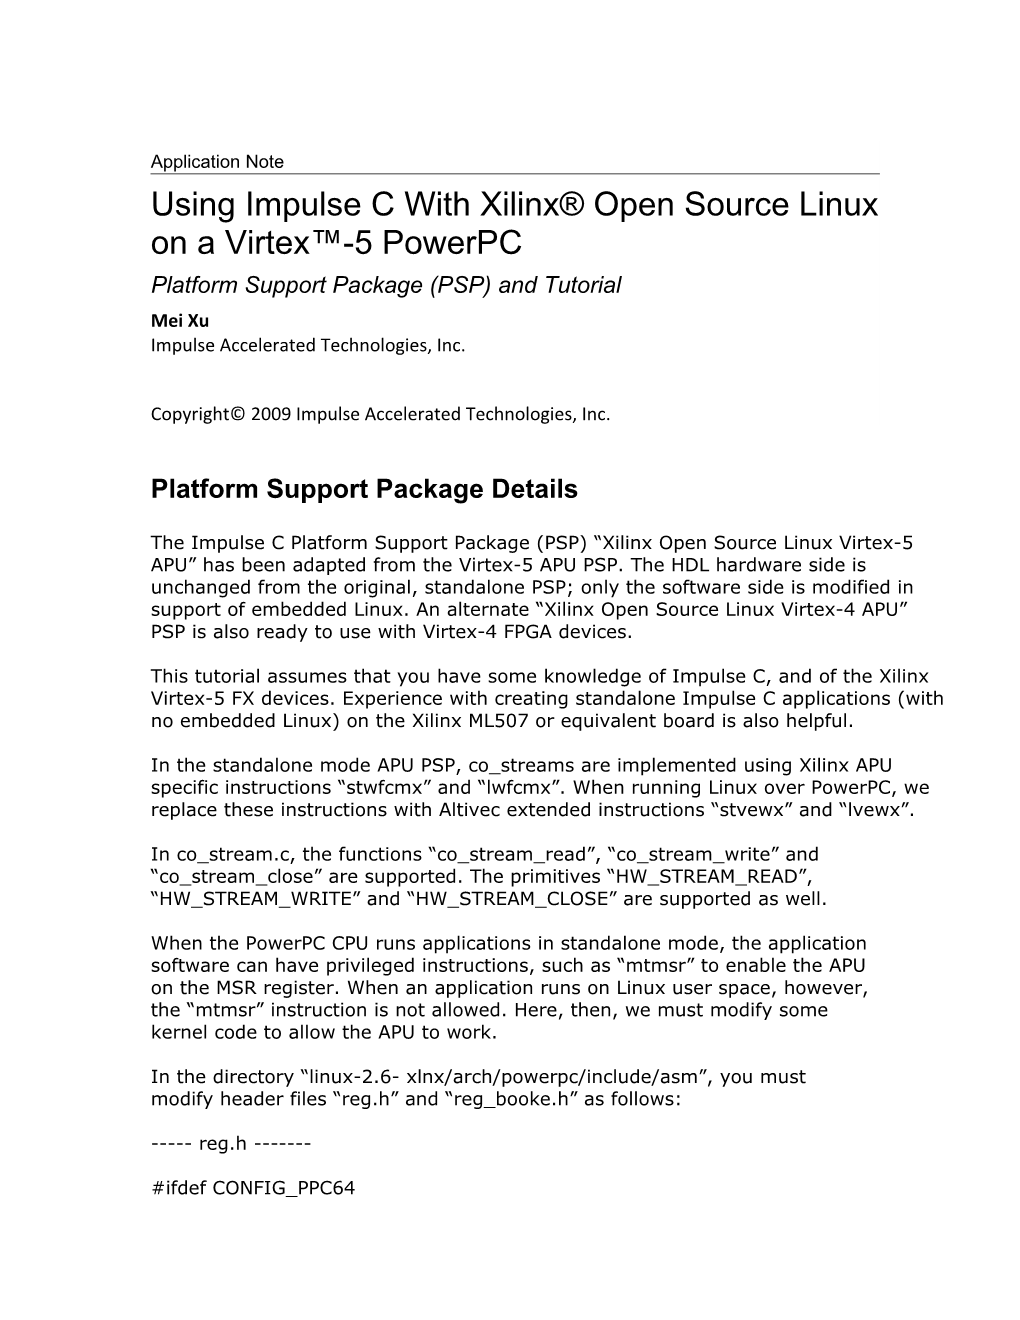 Documentation for Xilinx Open Source Linux on Powerpc with APU PSP and Tutorial